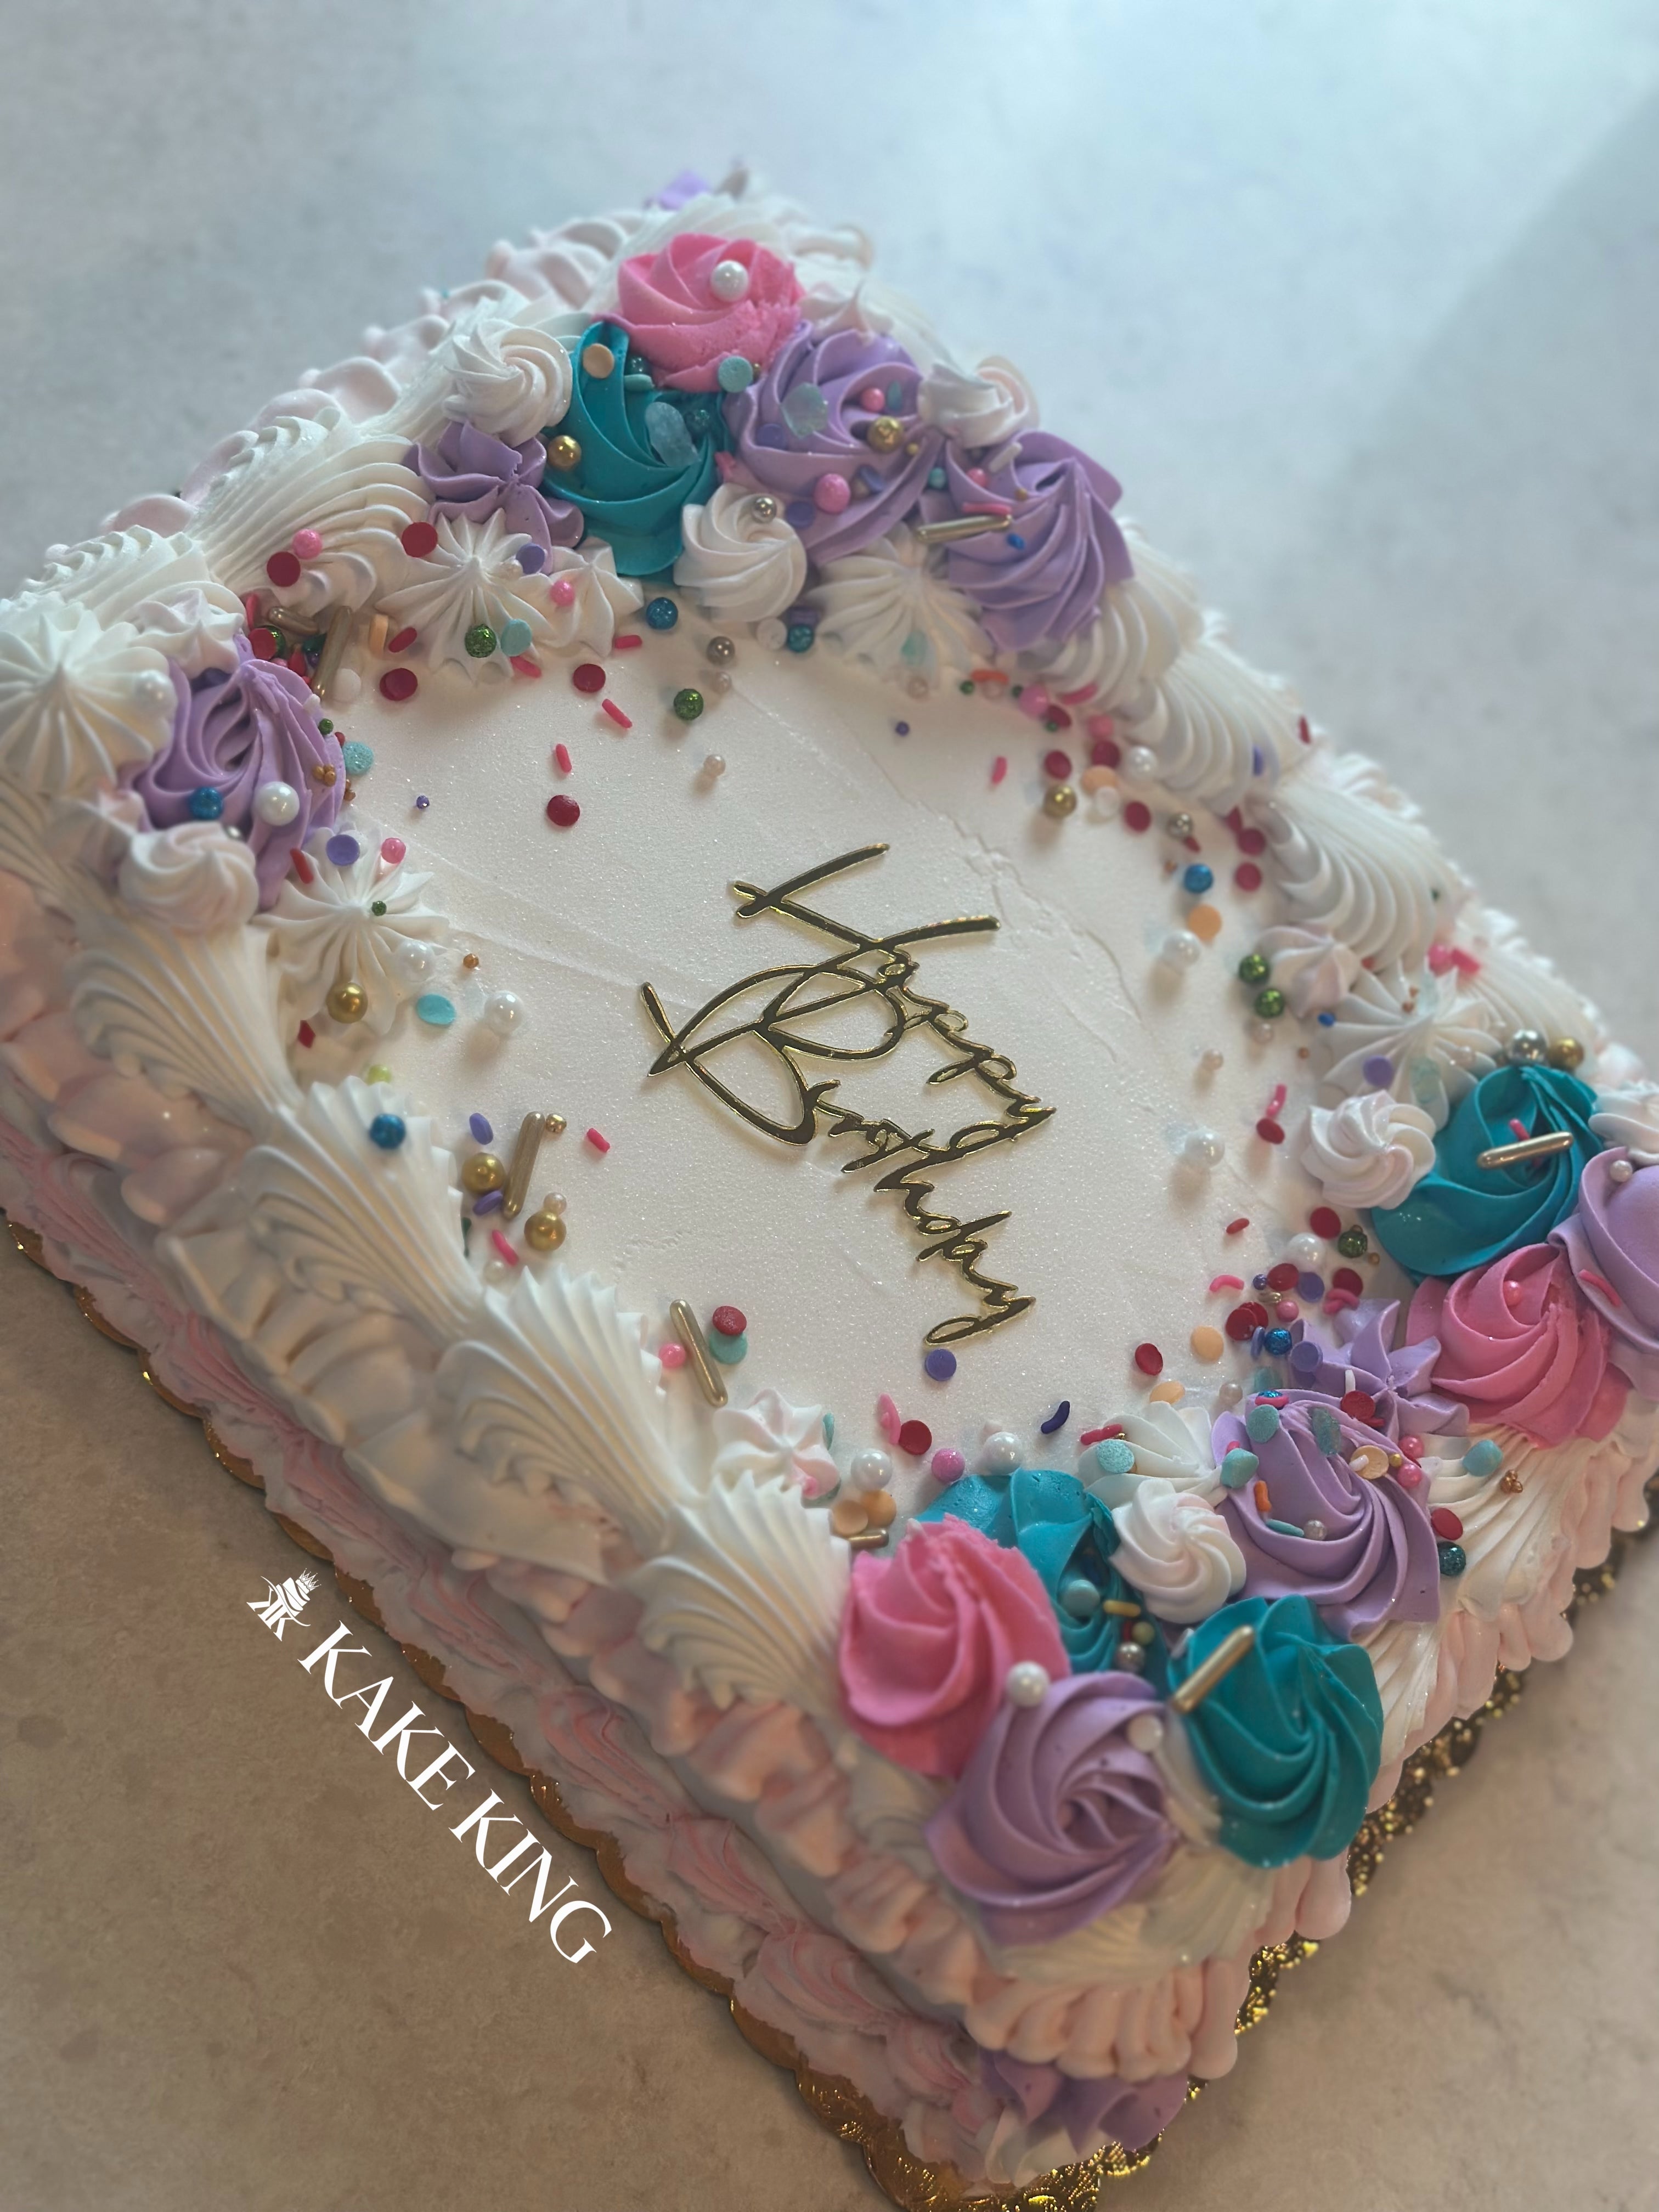 Buttercream Floral Sheet Cake - Decorated Cake by Nancys - CakesDecor